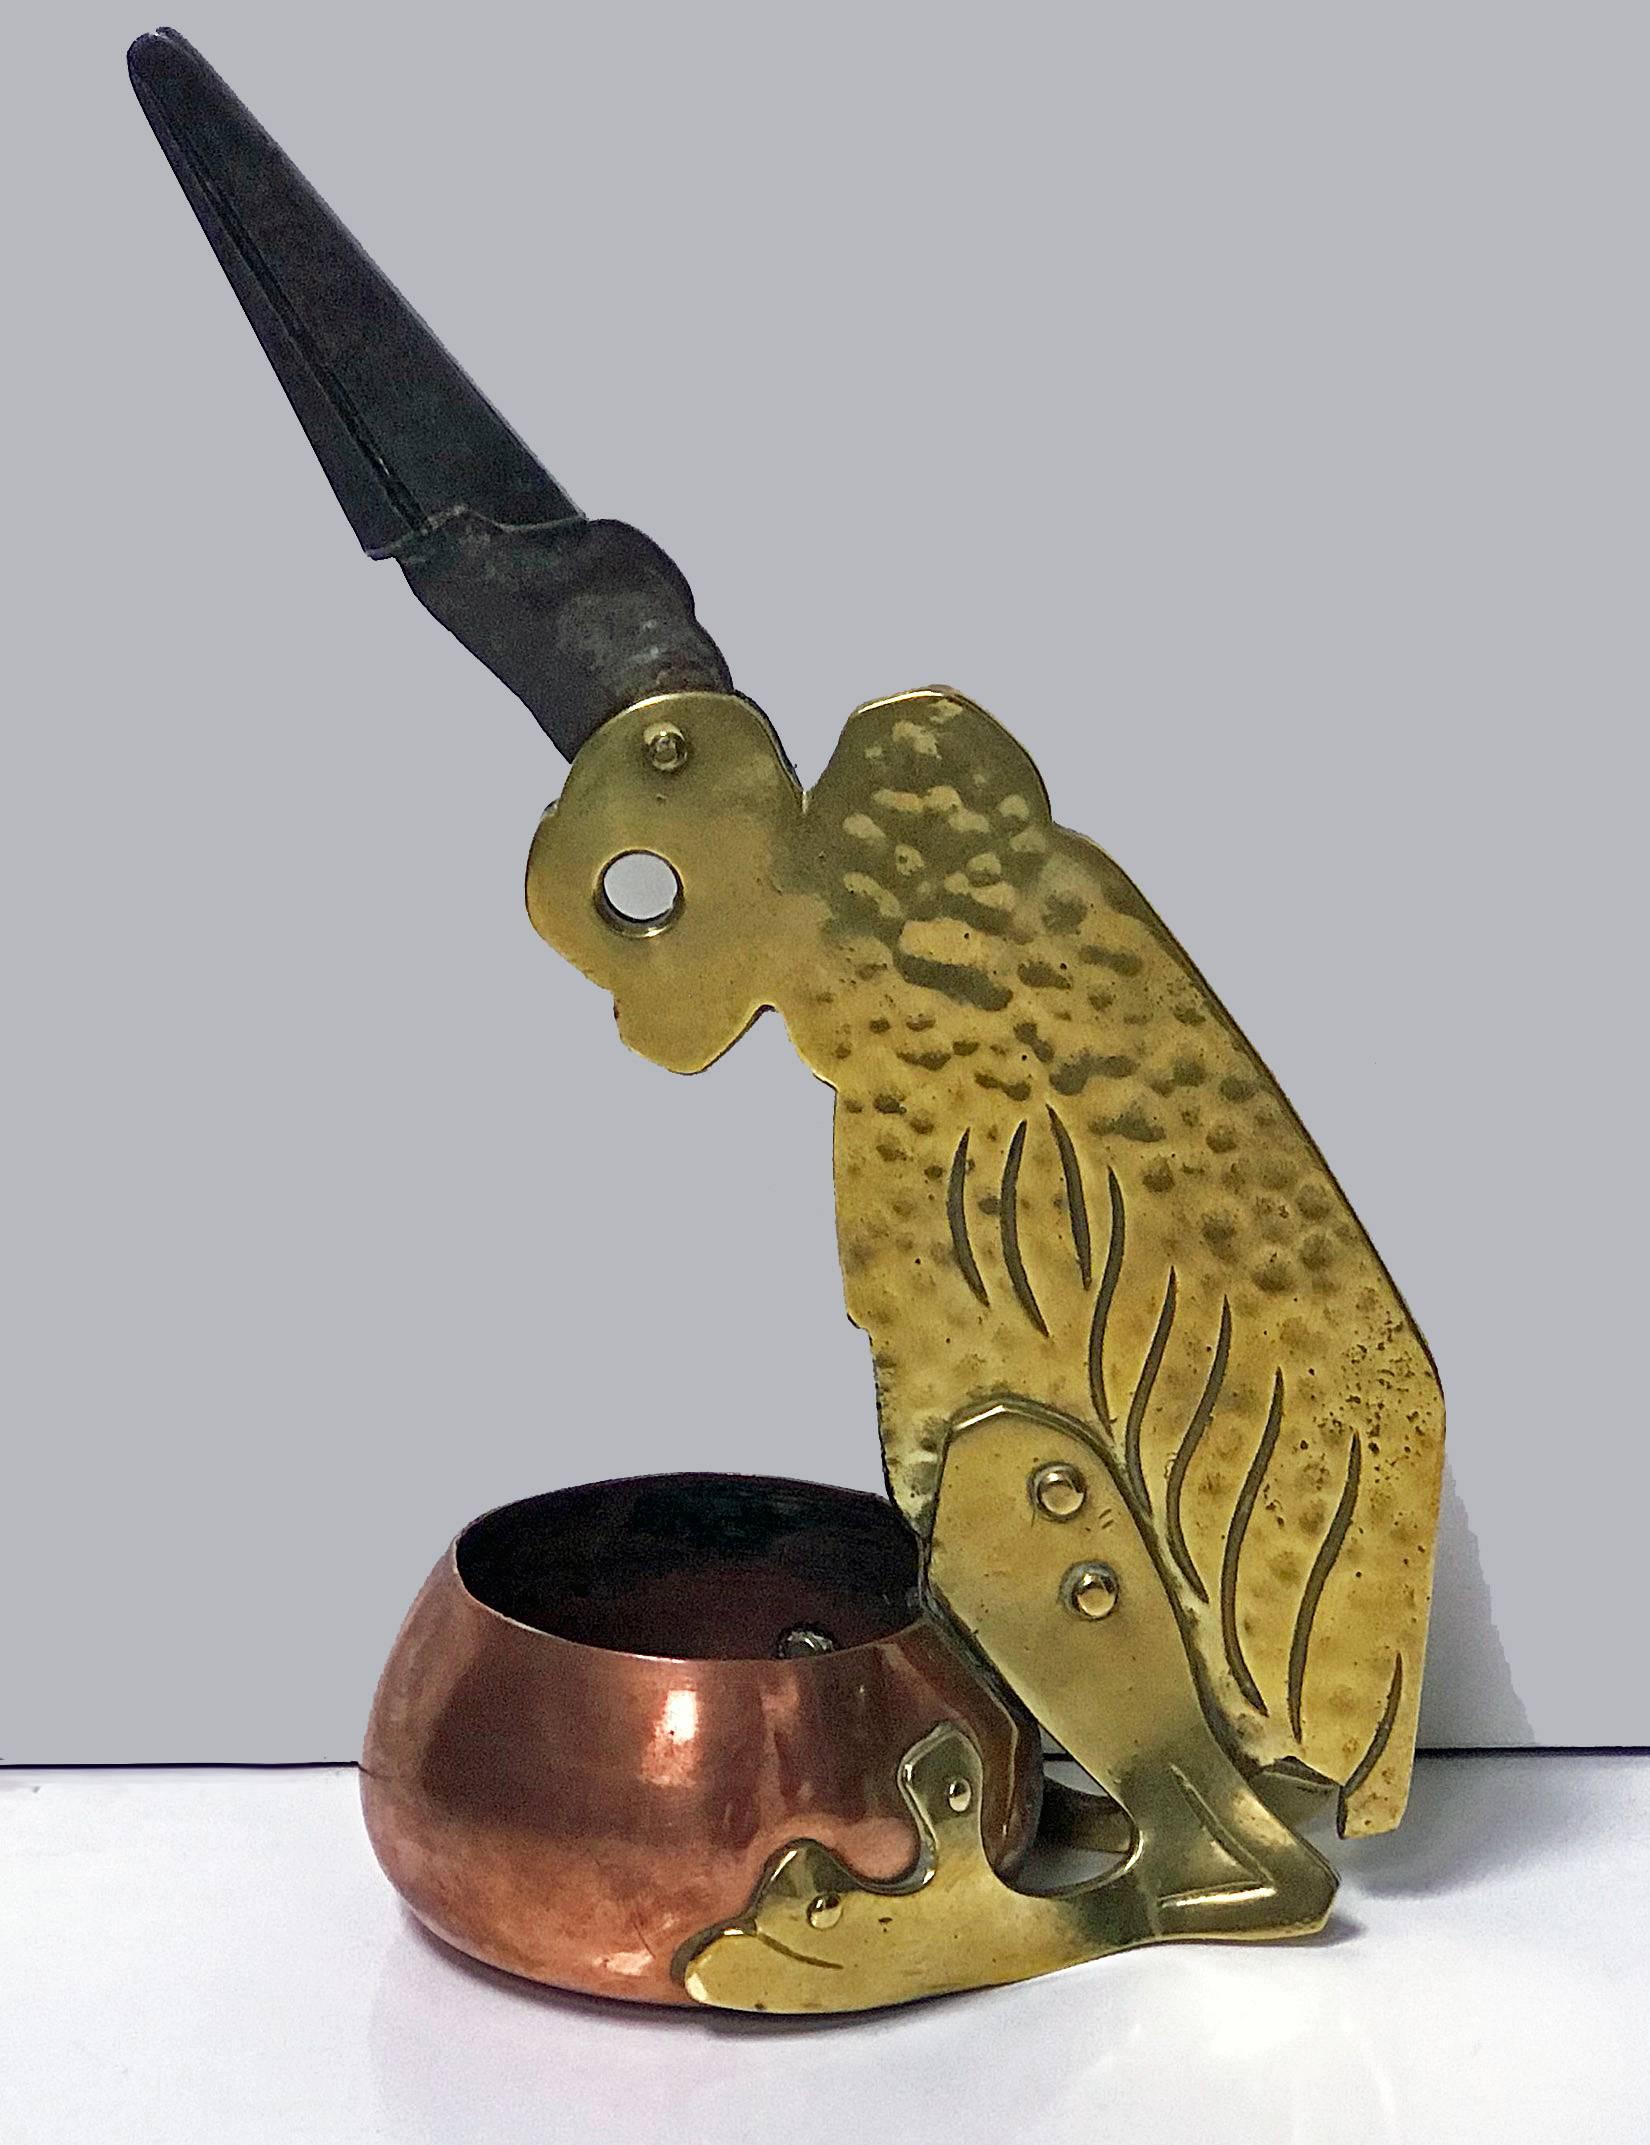 Art Nouveau Marabou stork cigar cutter, Ignatius Taschner, Munich, Germany, circa 1900. Ignatius Taschner (1871-1913), sculpture, medallist, graphic designer and Illustrator. Brass and copper riveted, the bird's-eye is the opening for the cigar and